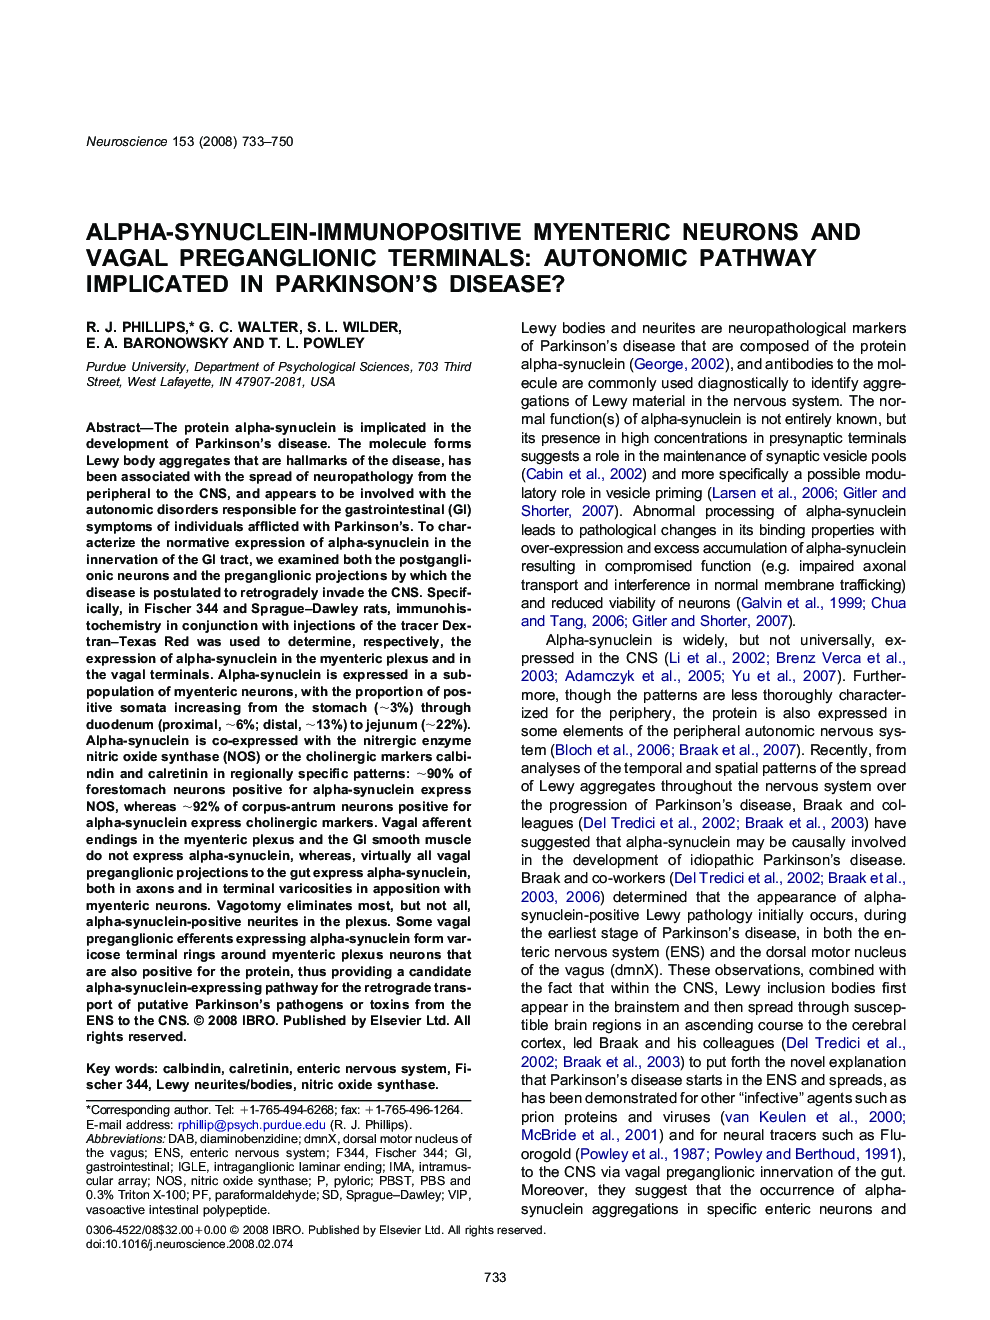 Alpha-synuclein-immunopositive myenteric neurons and vagal preganglionic terminals: Autonomic pathway implicated in Parkinson's disease?